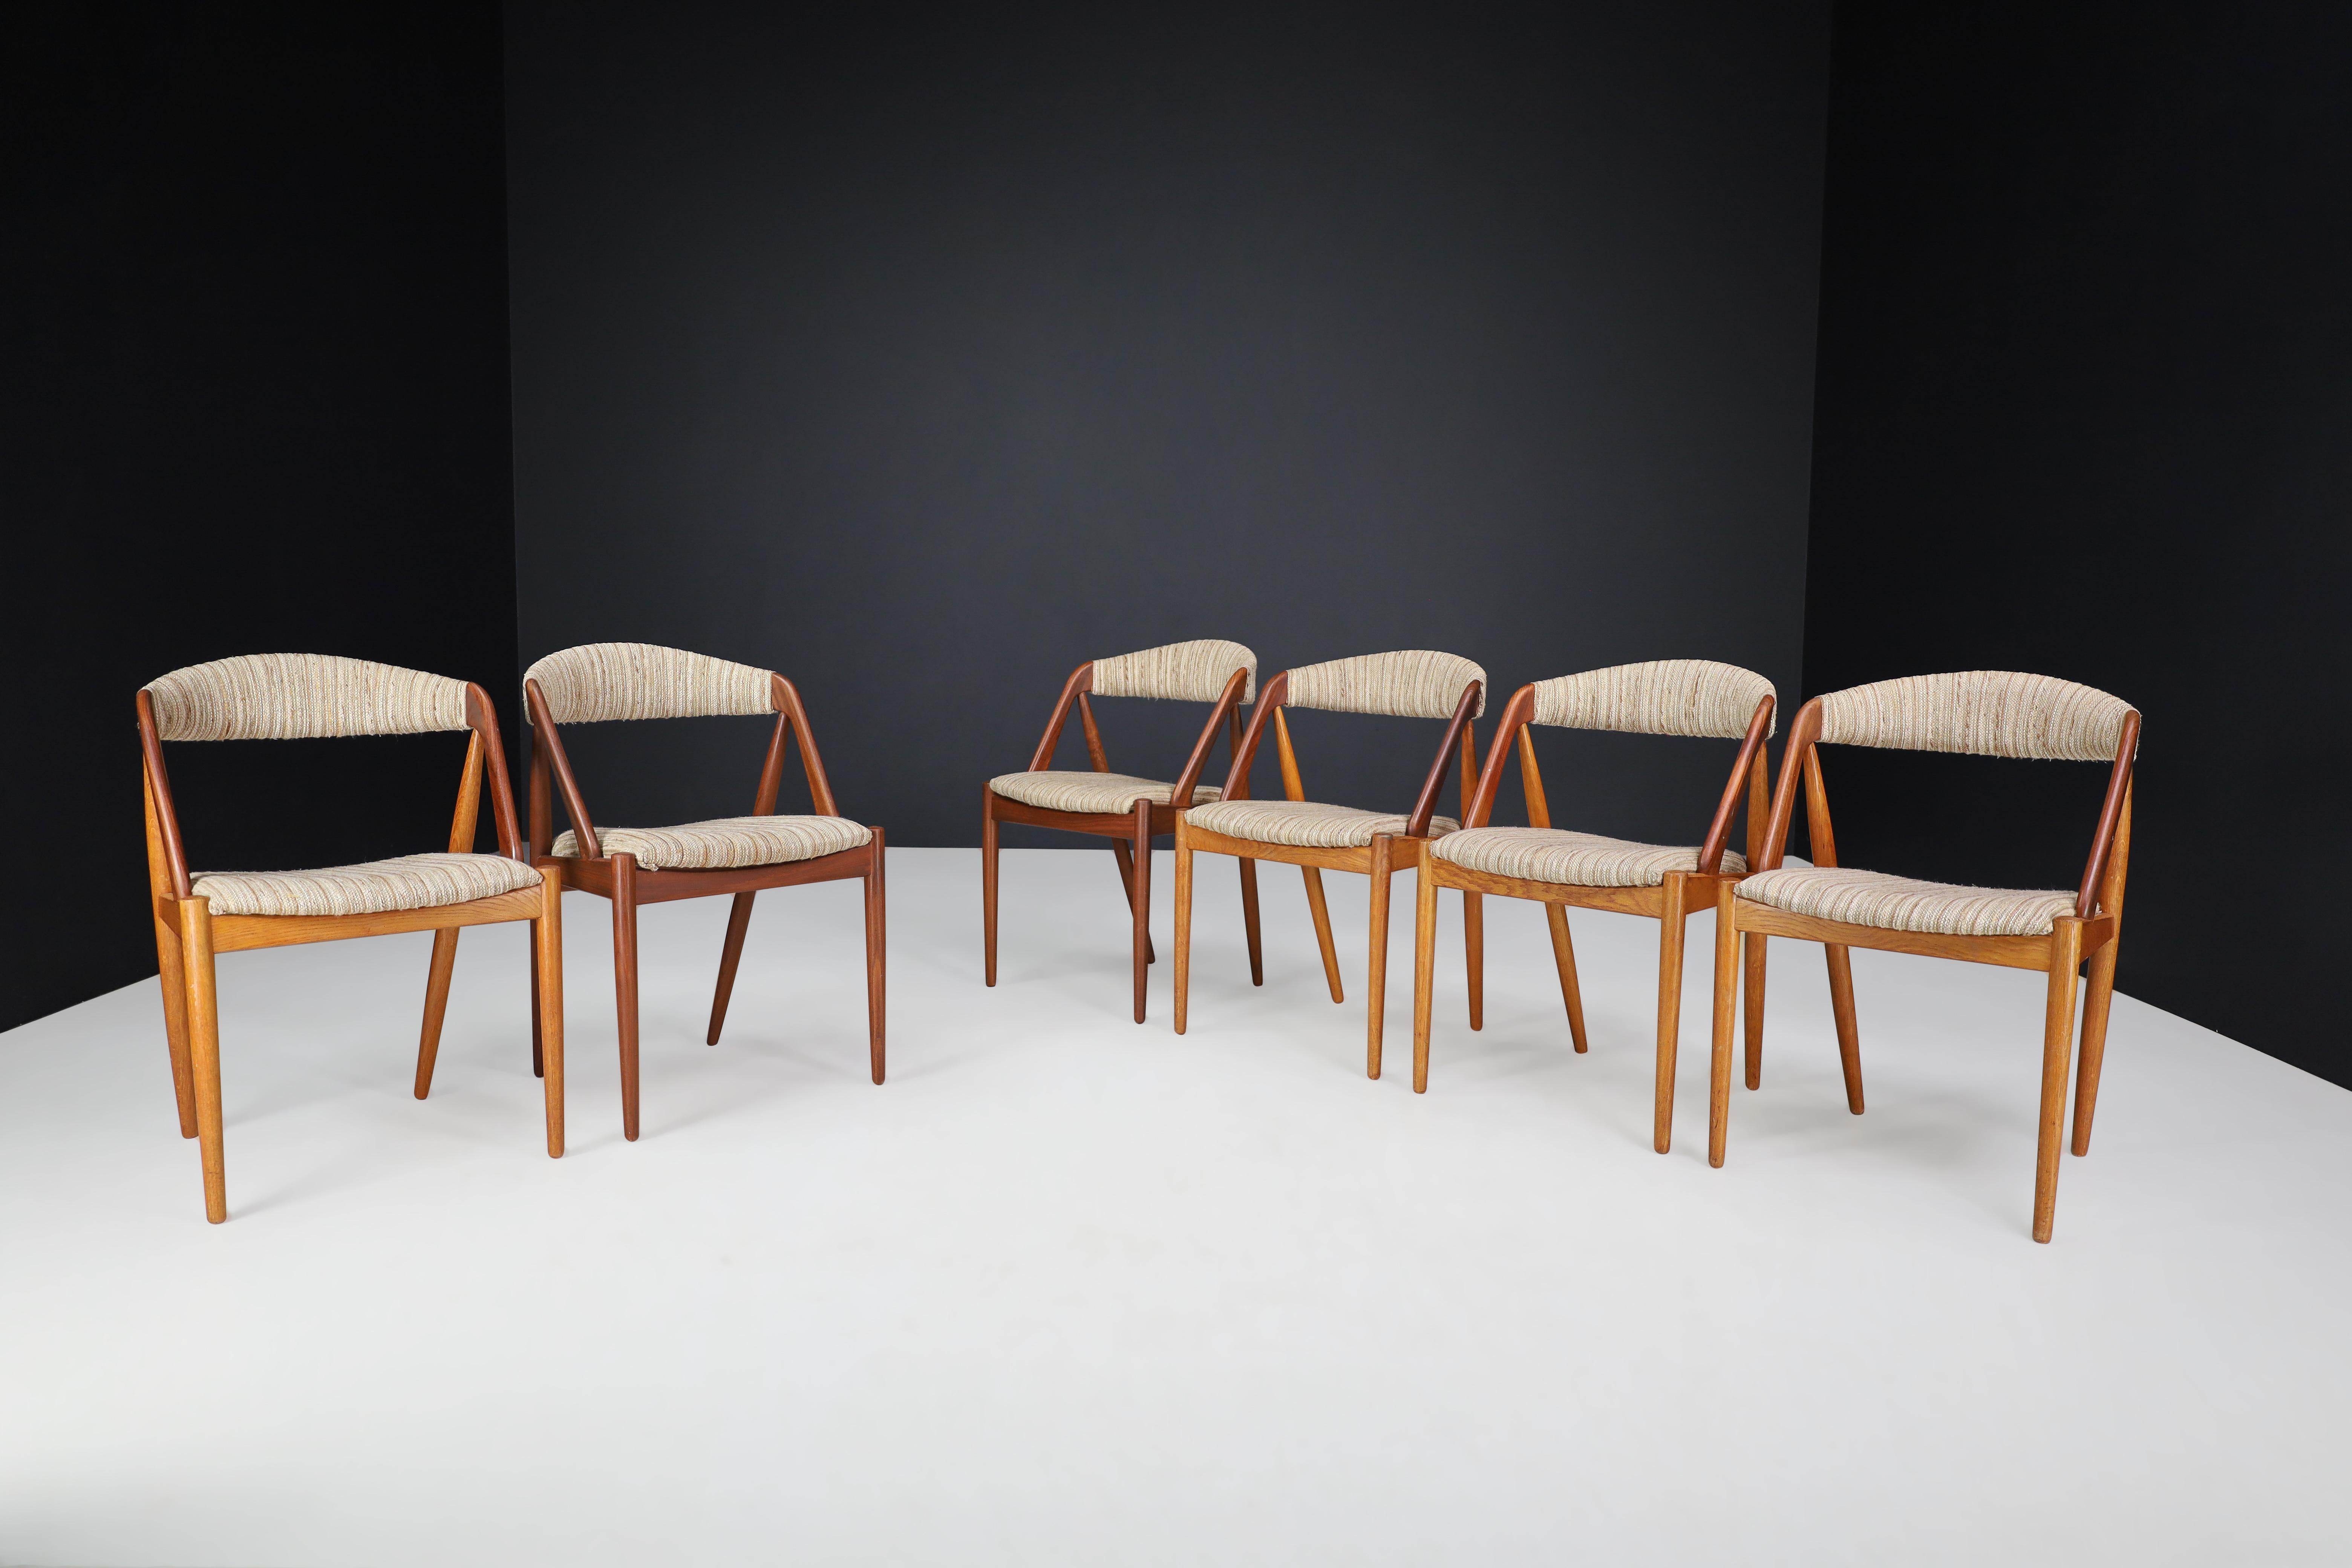 Kai Kristiansen oak dining chairs set/6, Denmark, 1960s 

Model 31 Dining Chairs by Kai Kristiansen, Denmark, 1960s. Model 31 is one of the most well-known chairs designed by Kai Kristiansen - a true Classic with its curved backrest, crooked